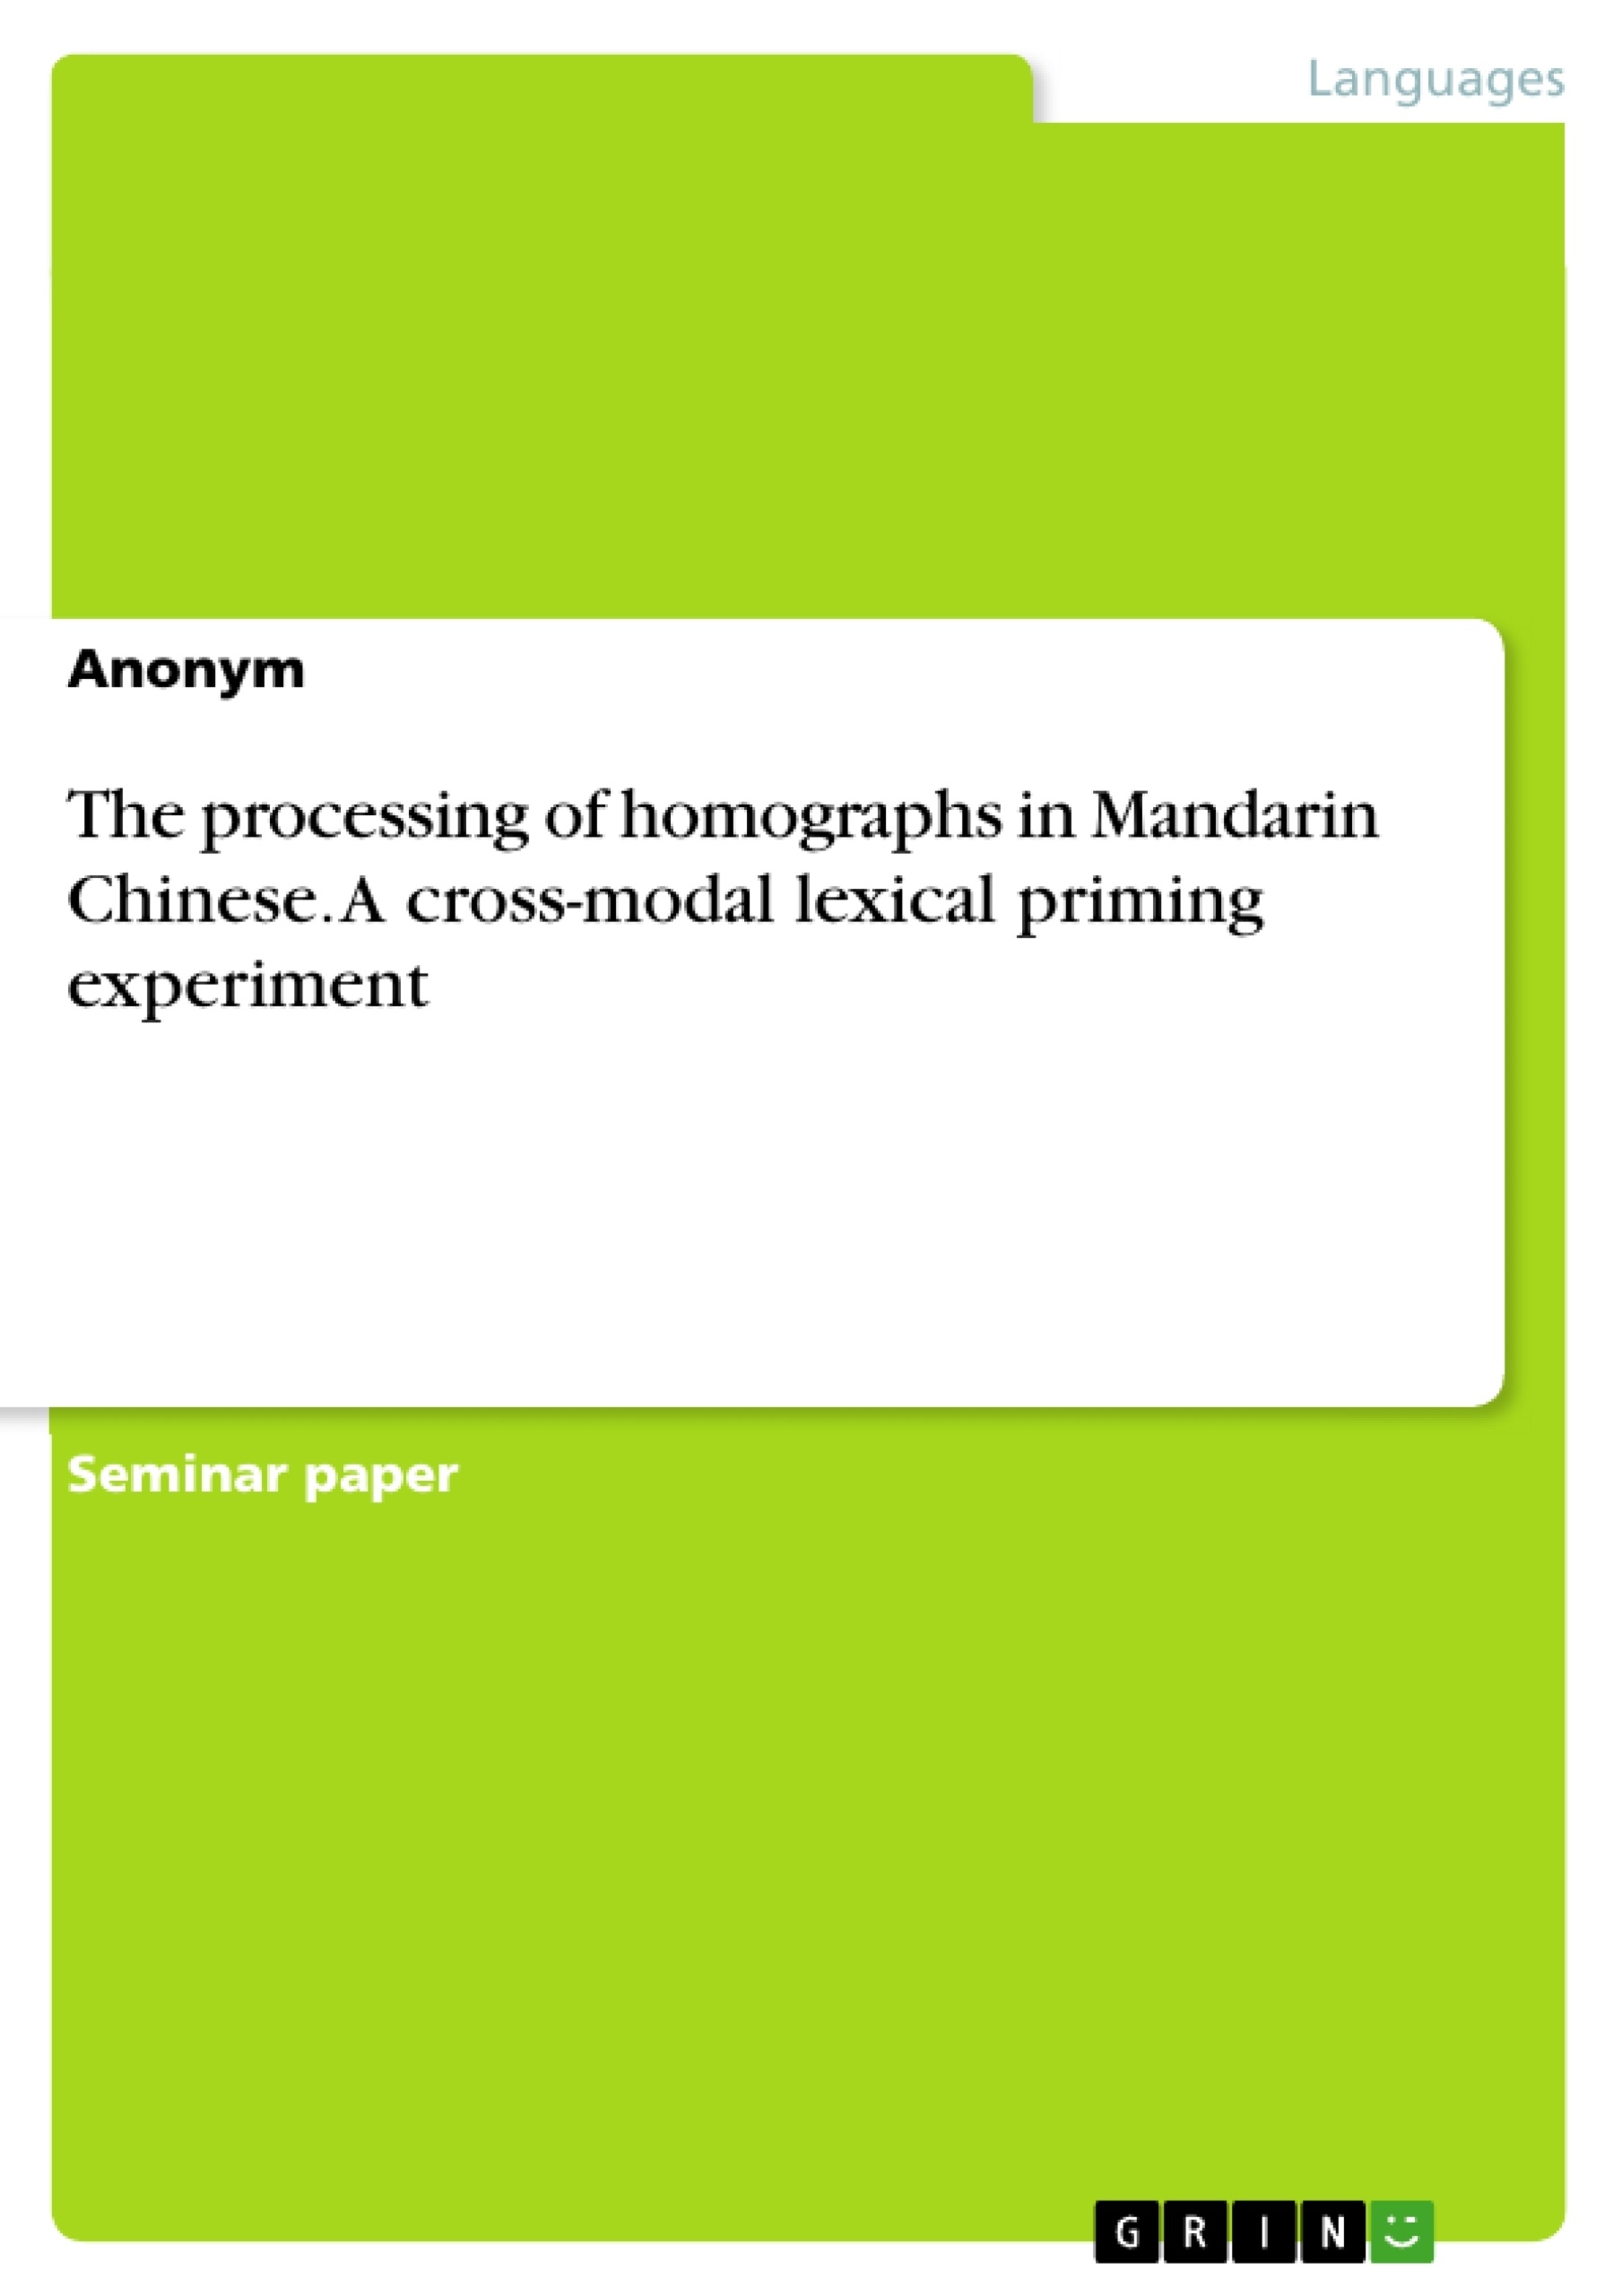 Título: The processing of homographs in Mandarin Chinese. A cross-modal lexical priming experiment